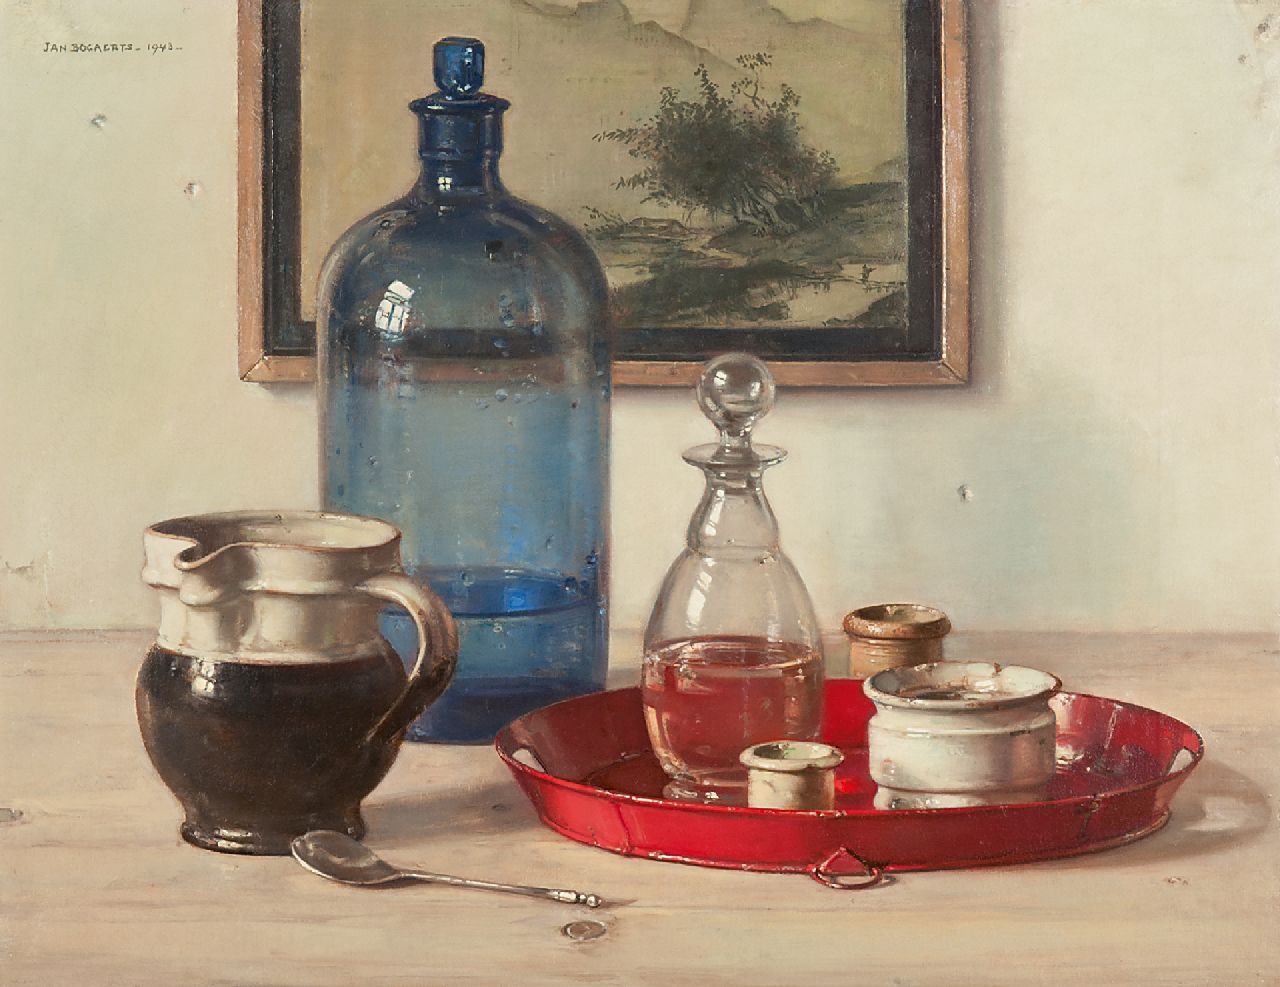 Bogaerts J.J.M.  | Johannes Jacobus Maria 'Jan' Bogaerts | Paintings offered for sale | Still life with blue bottle and jars, oil on canvas 34.7 x 45.4 cm, signed u.l. and dated 1943